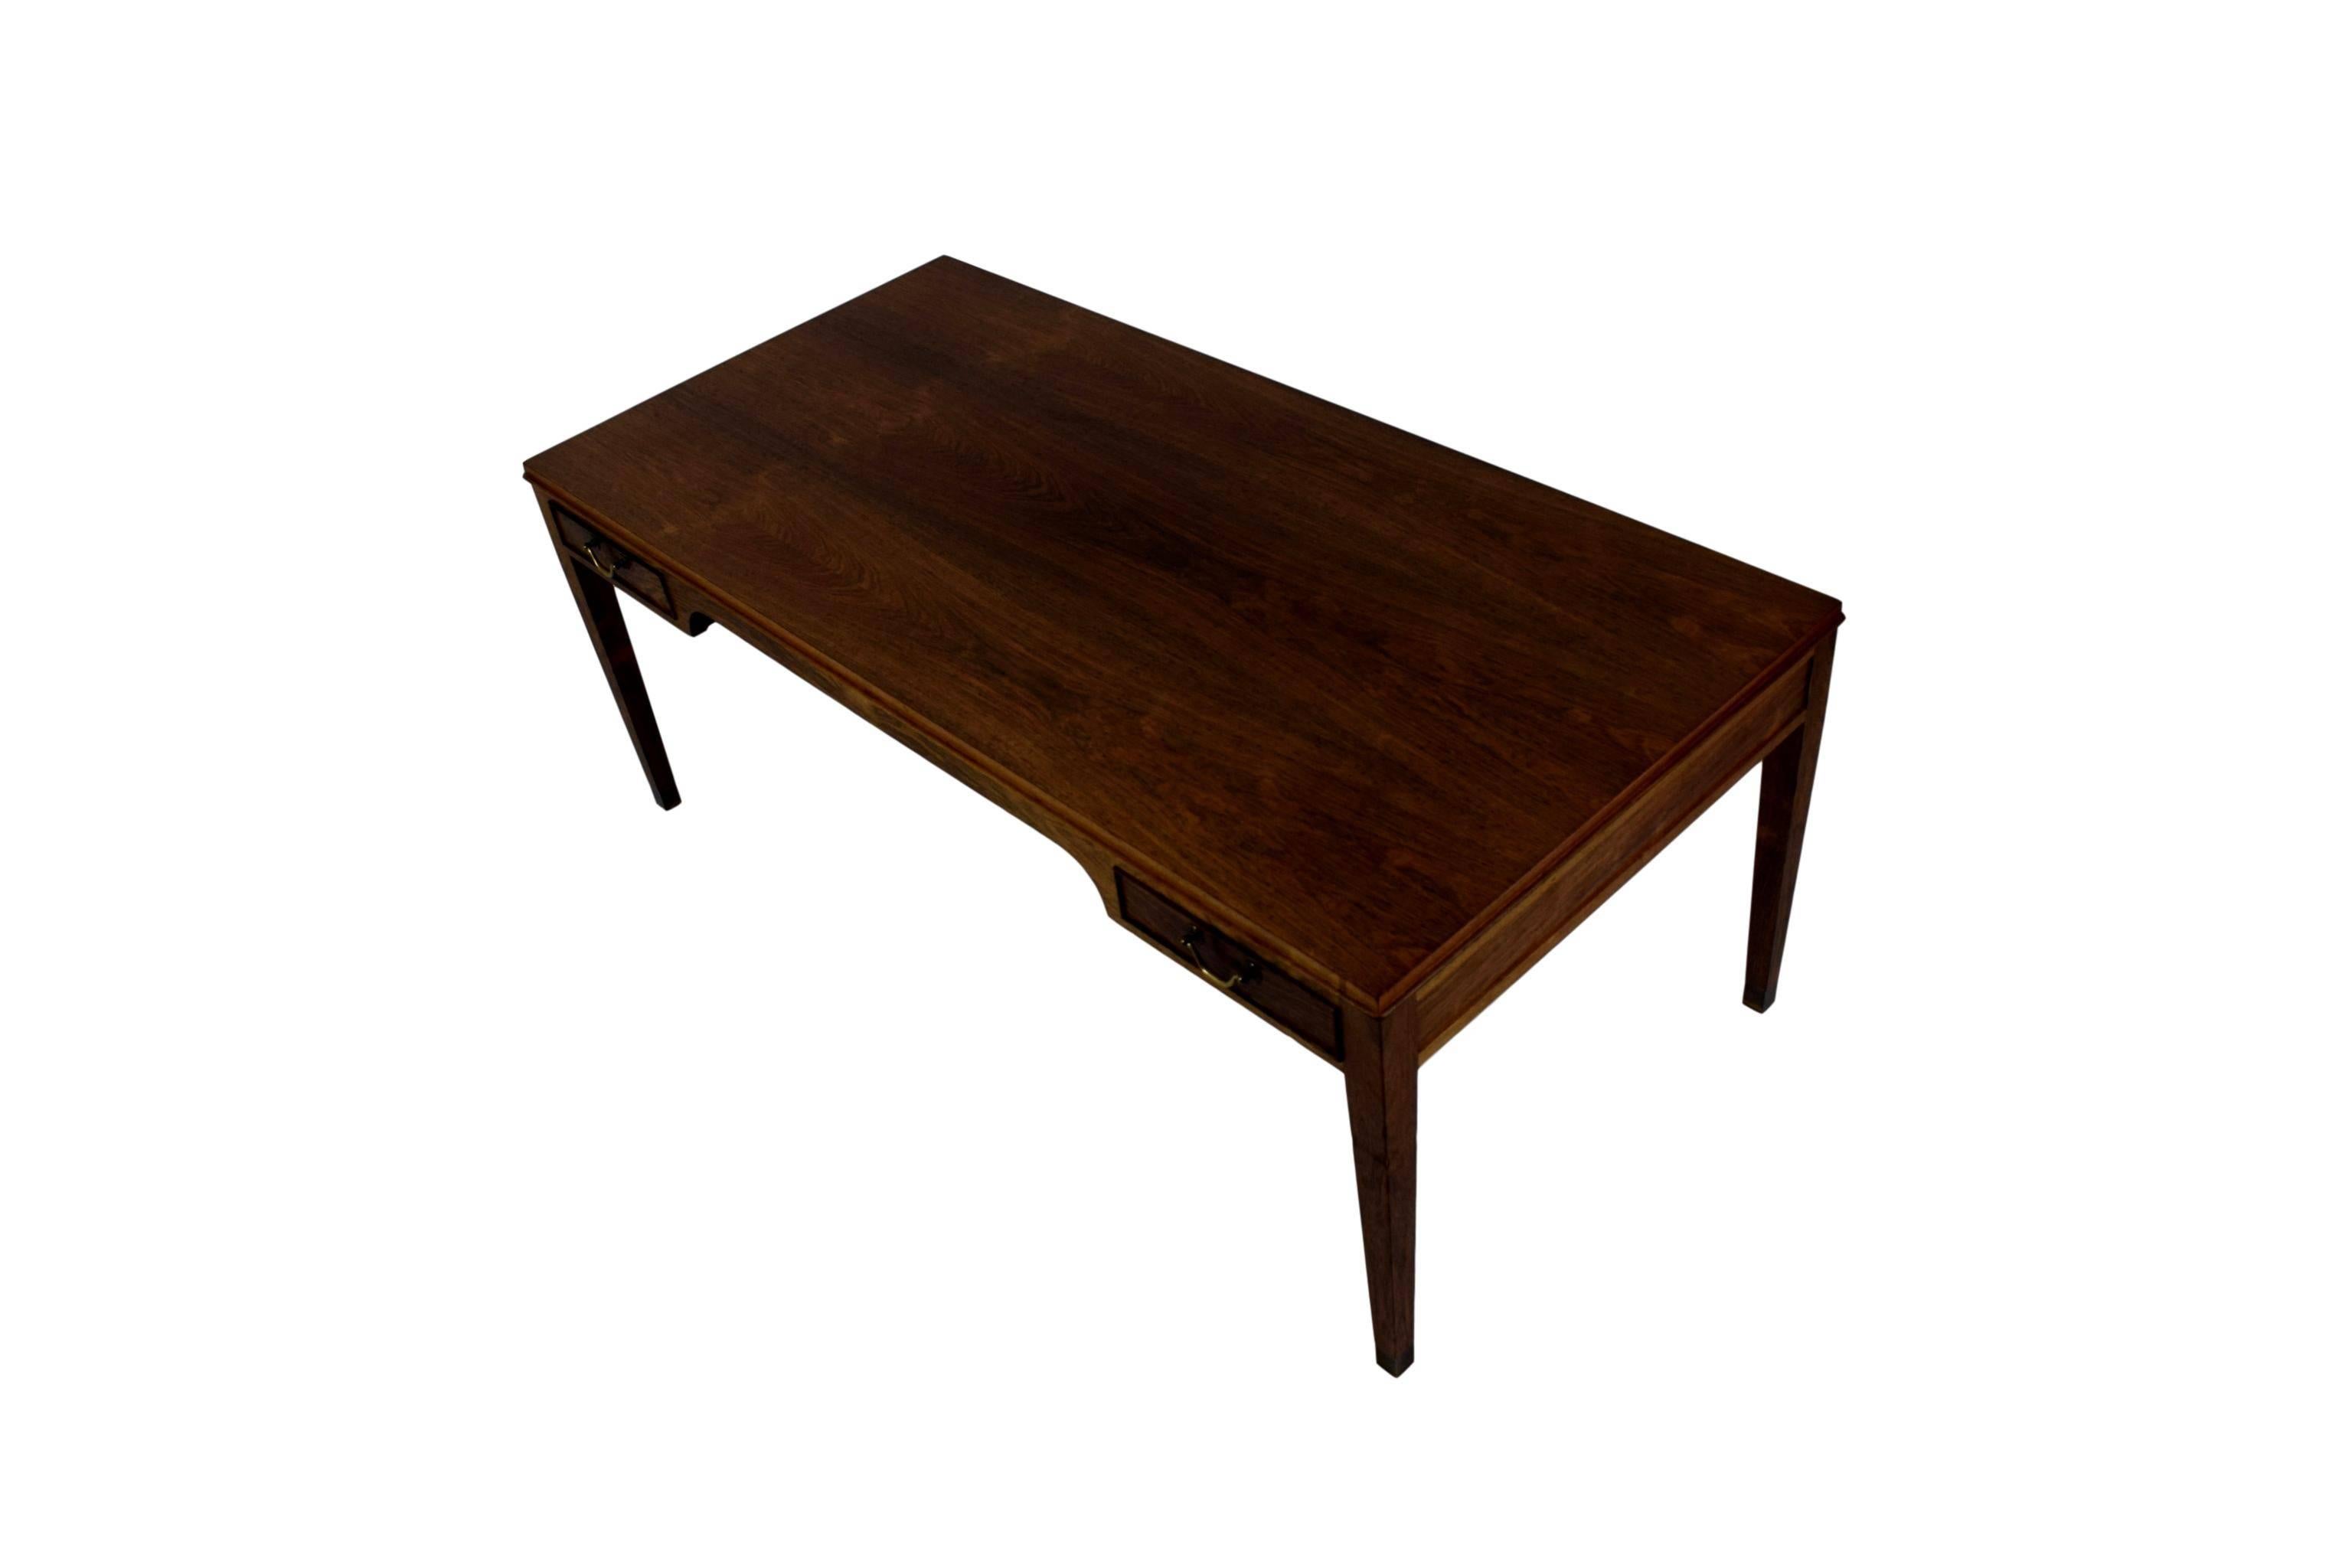 A Danish midcentury rosewood coffee table by Frits Henningsen. Rosewood veneer and solid rosewood legs. Four drawers with brass handles. Tapered legs with brass shoes.

